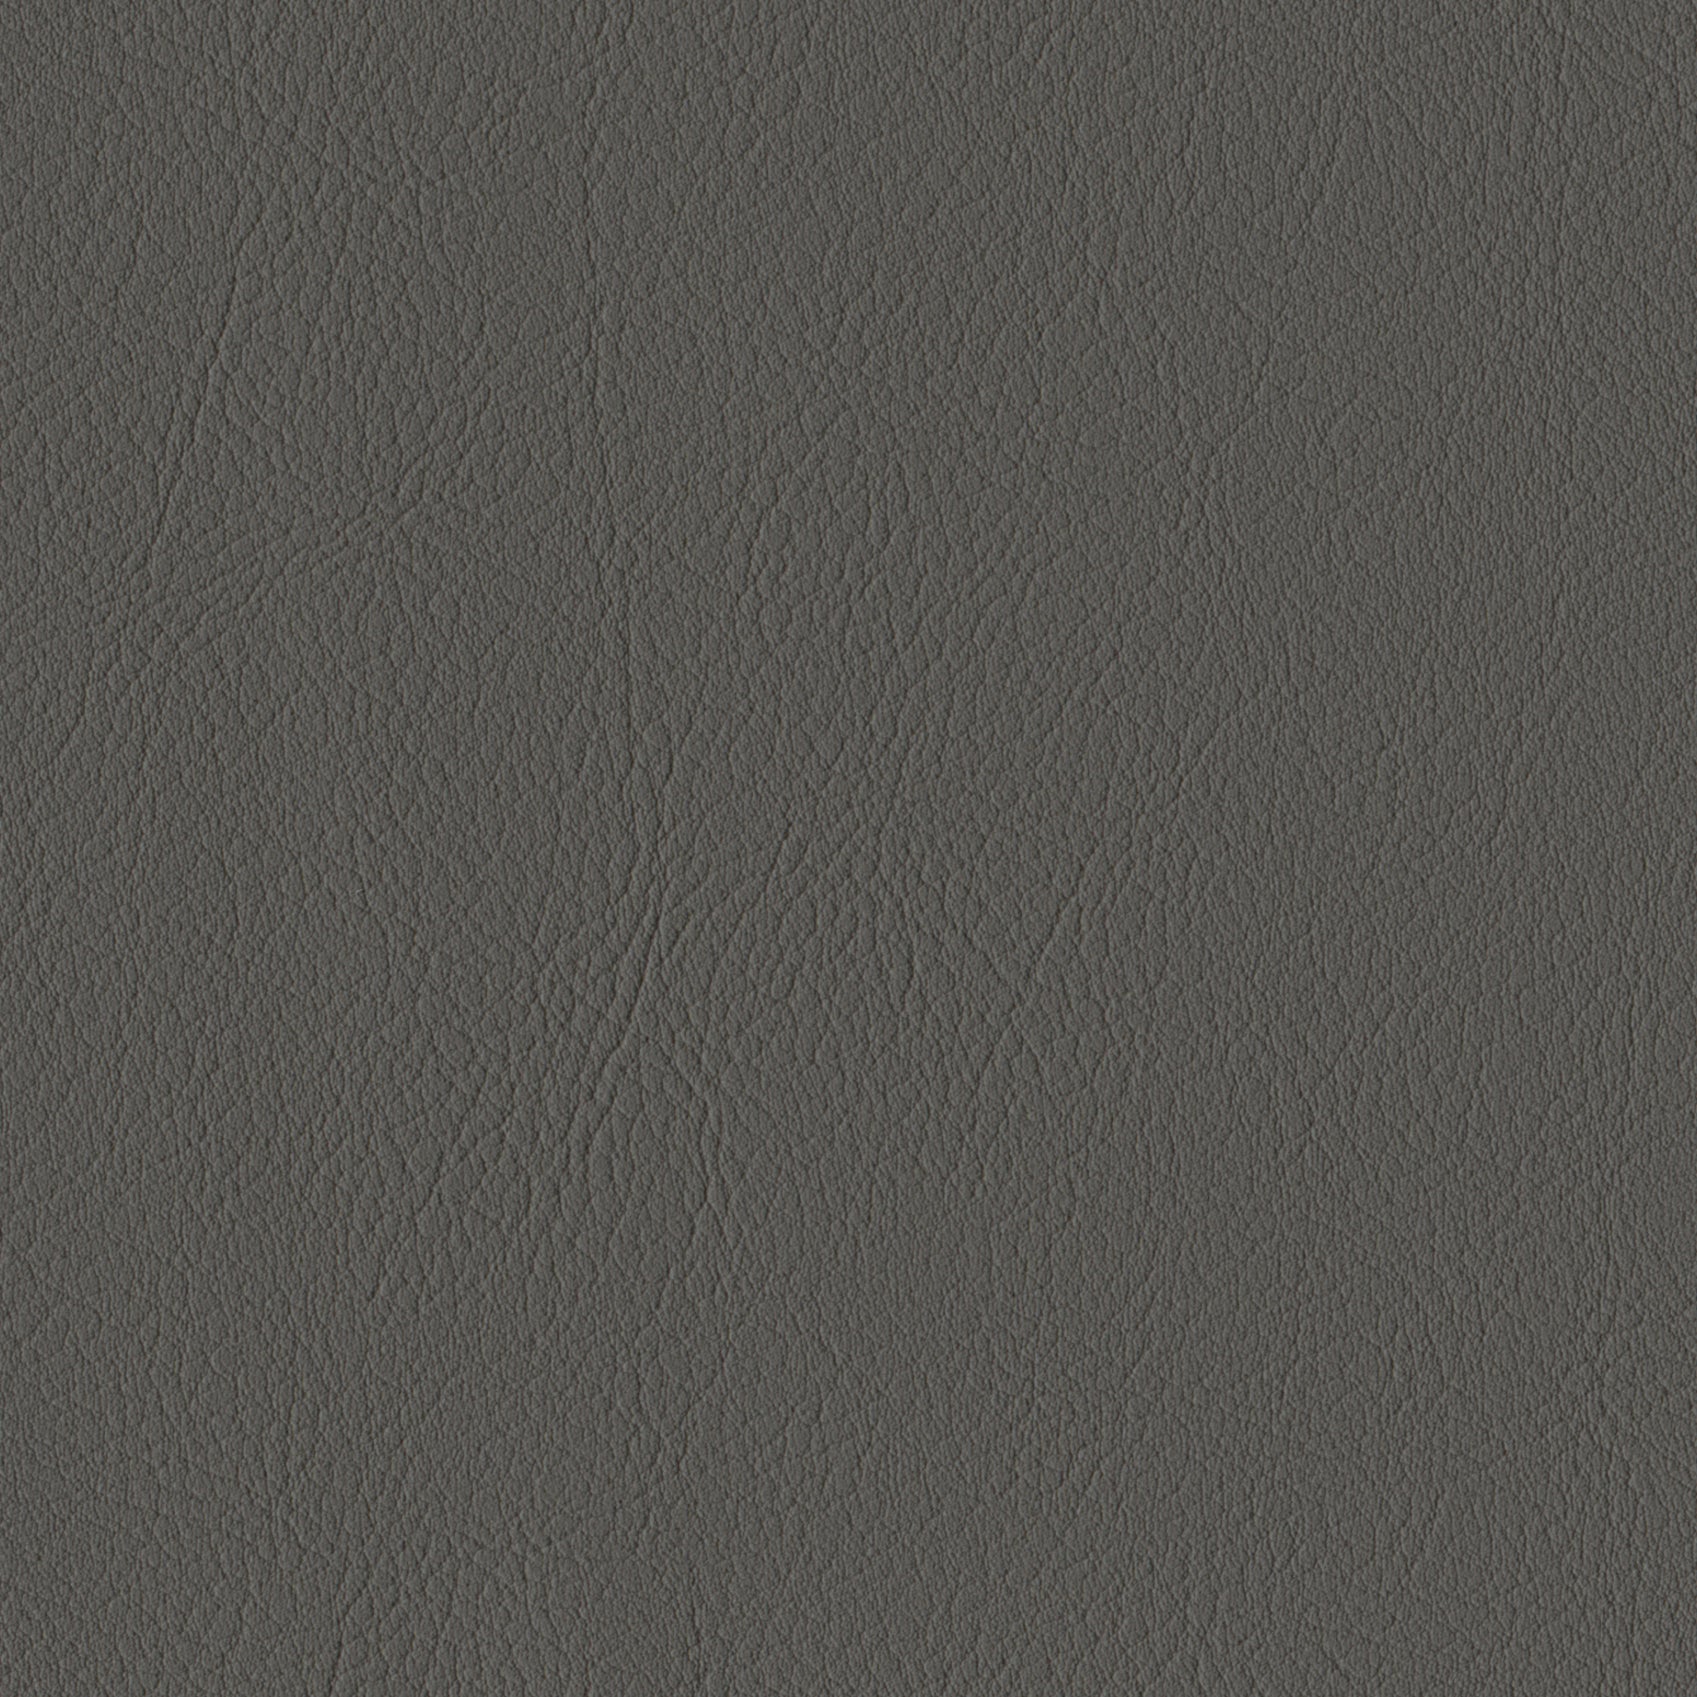    Andriali-Contract-Vinyl_Upholstery-Design-LegacyFR-Color-619Slate-Width-140cm